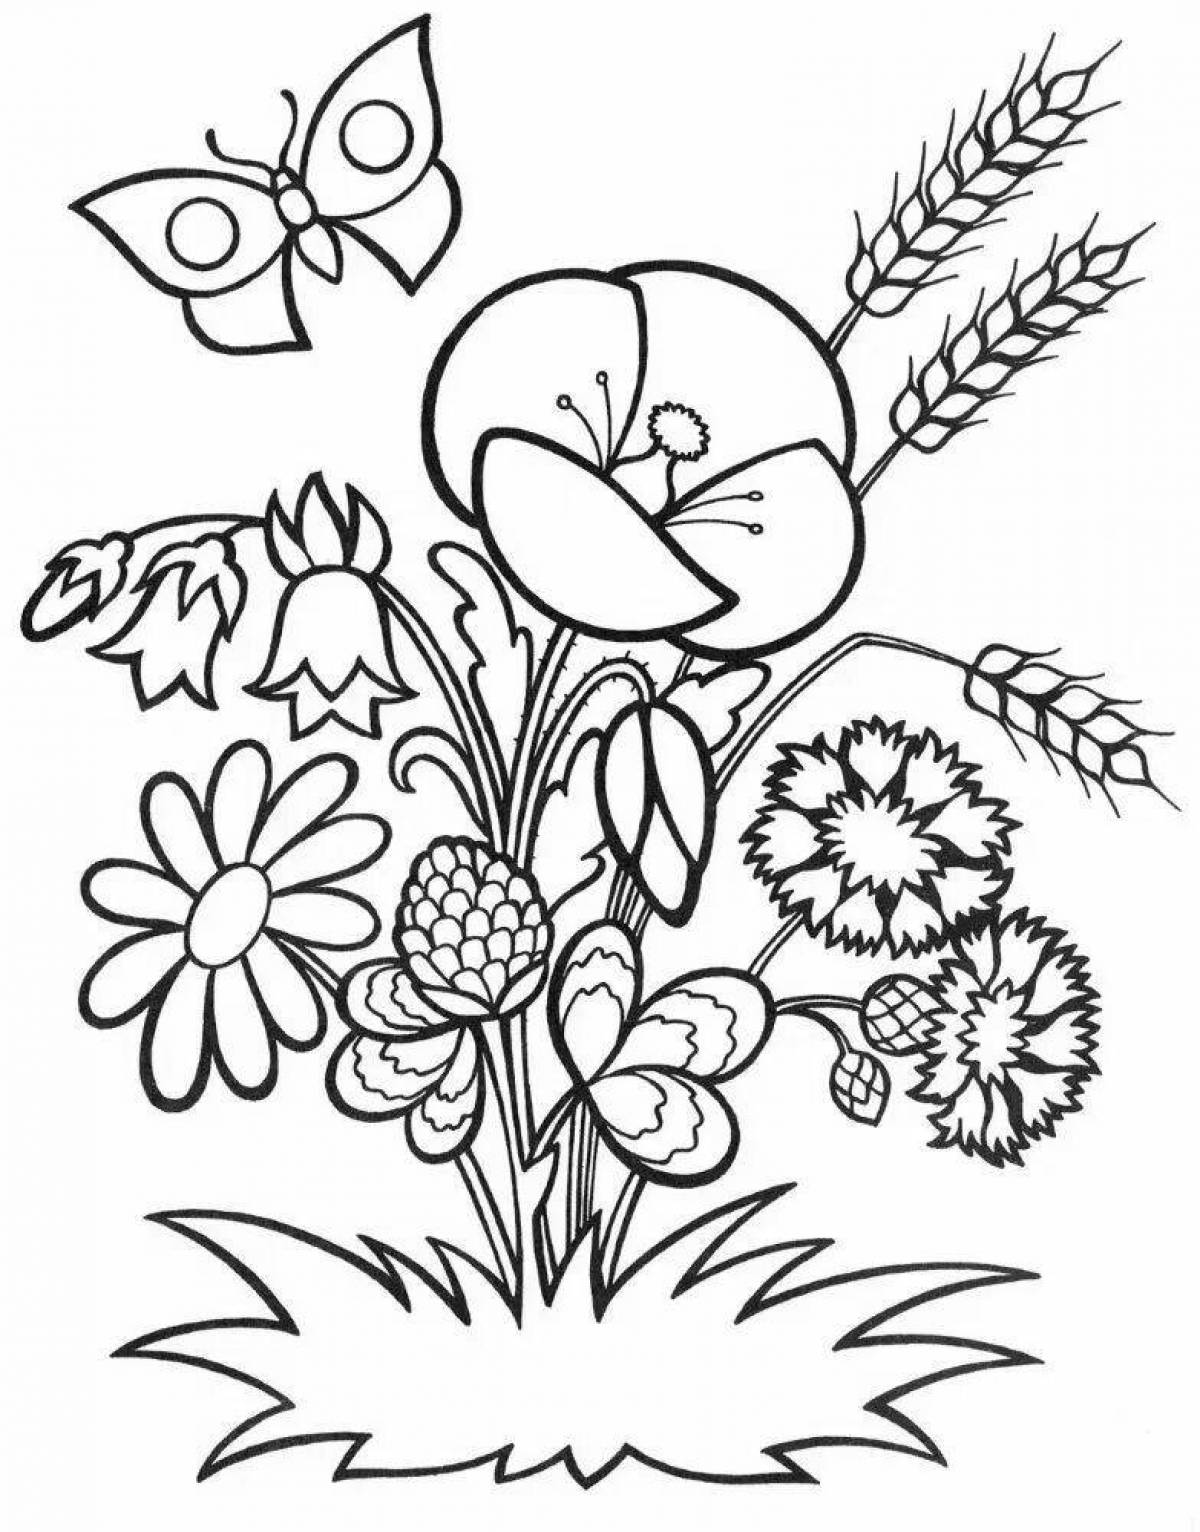 Fun plant coloring for kids